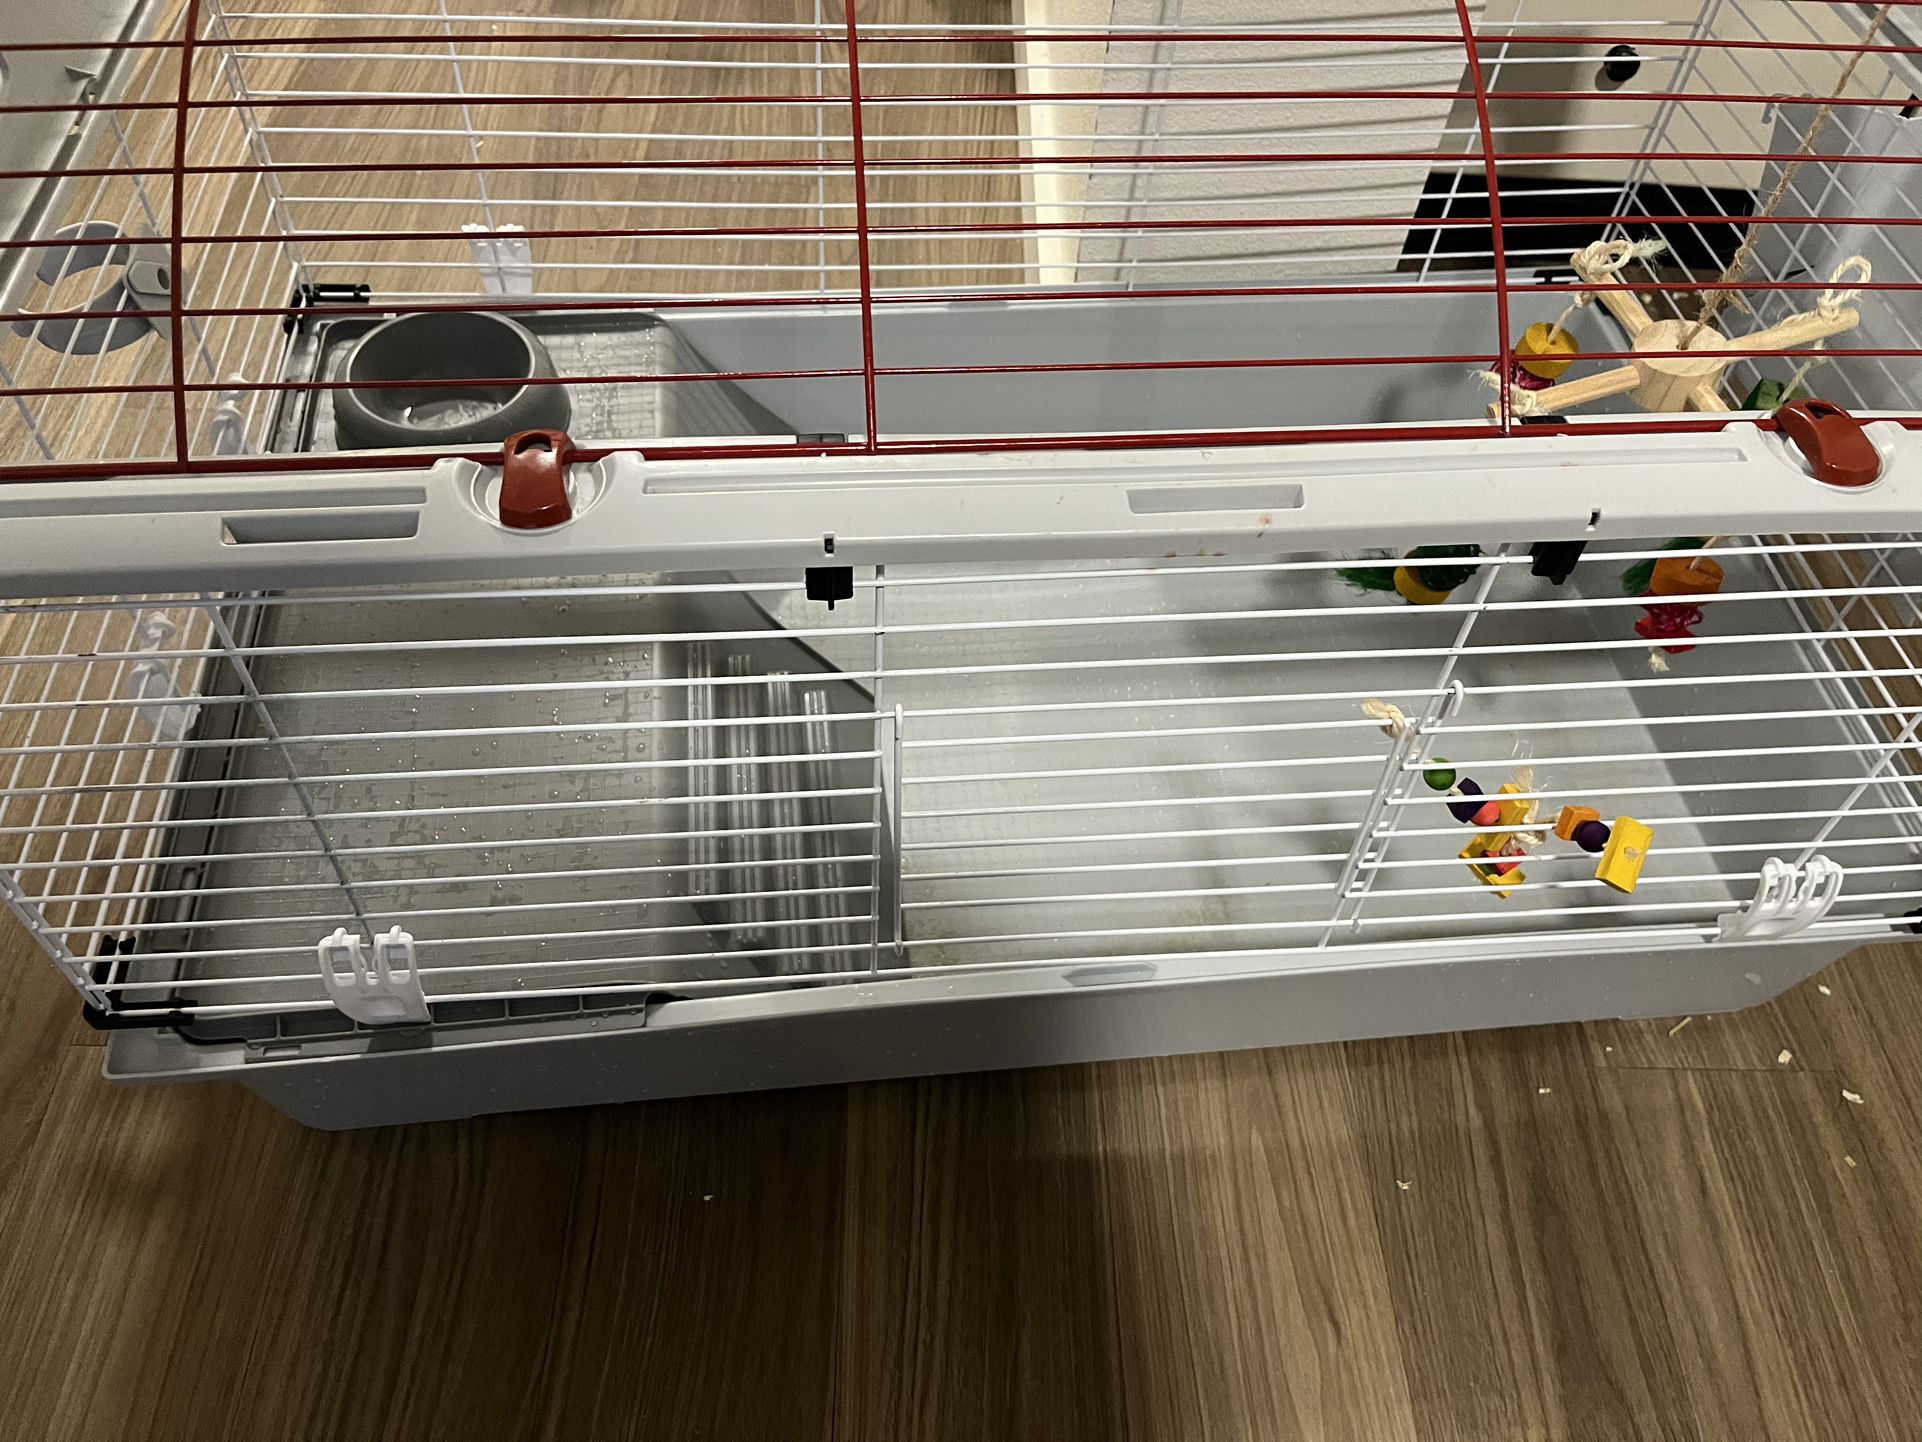 Guinea Pig, Enclosure And Other Items